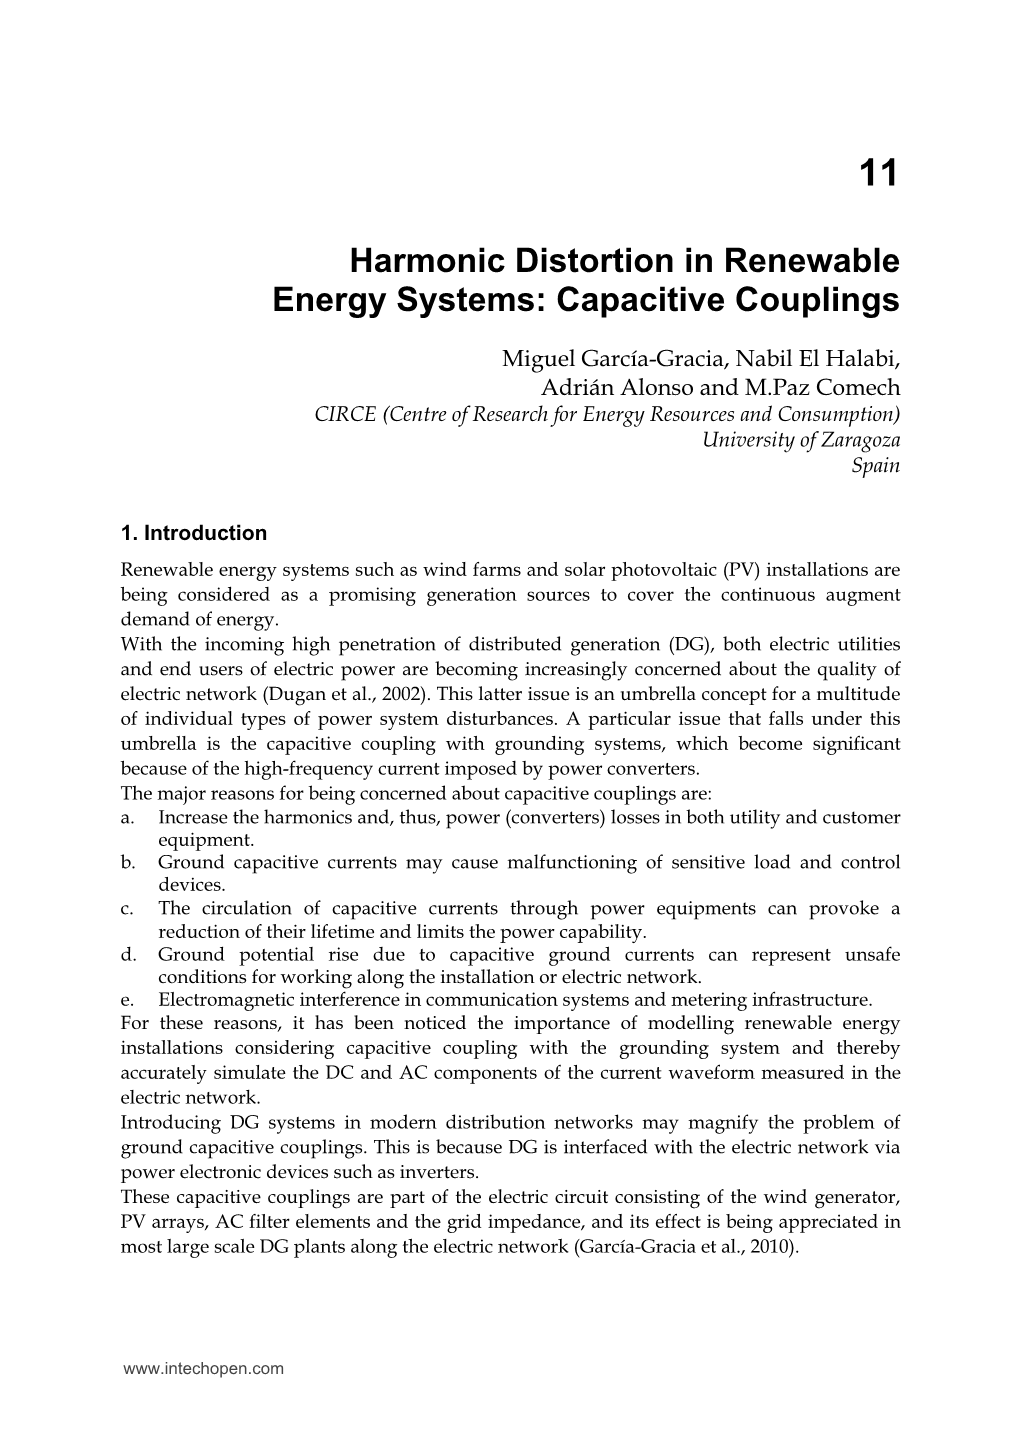 Harmonic Distortion in Renewable Energy Systems: Capacitive Couplings